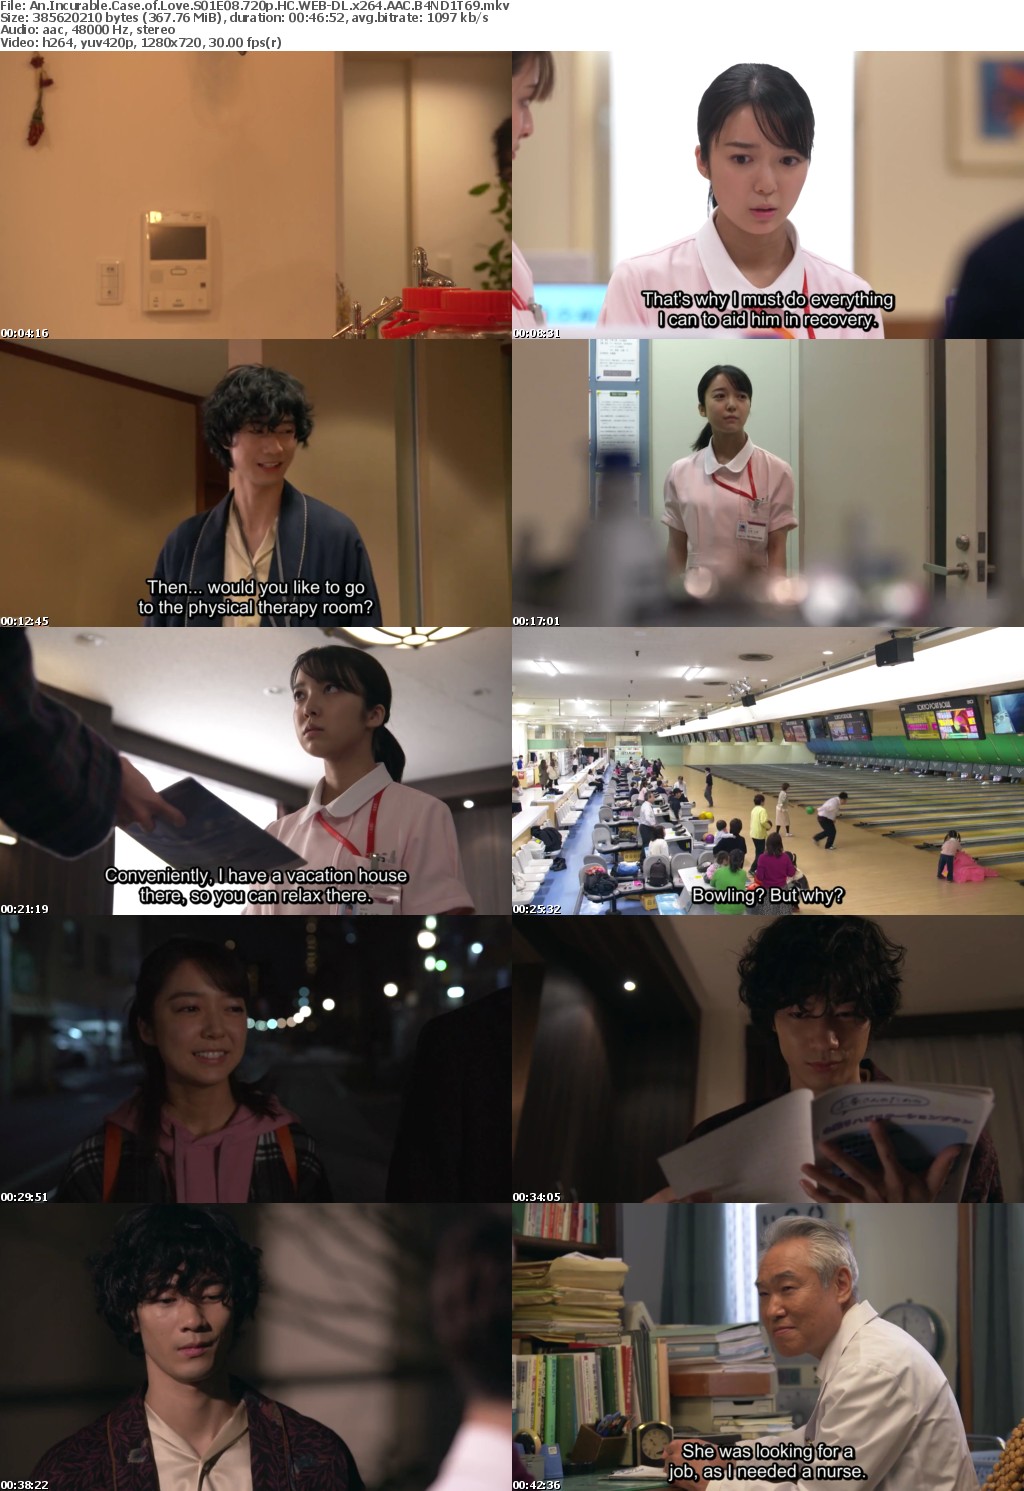 An Incurable Case of Love S01 COMPLETE 720p HC WEB-DL x264 AAC B4ND1T69